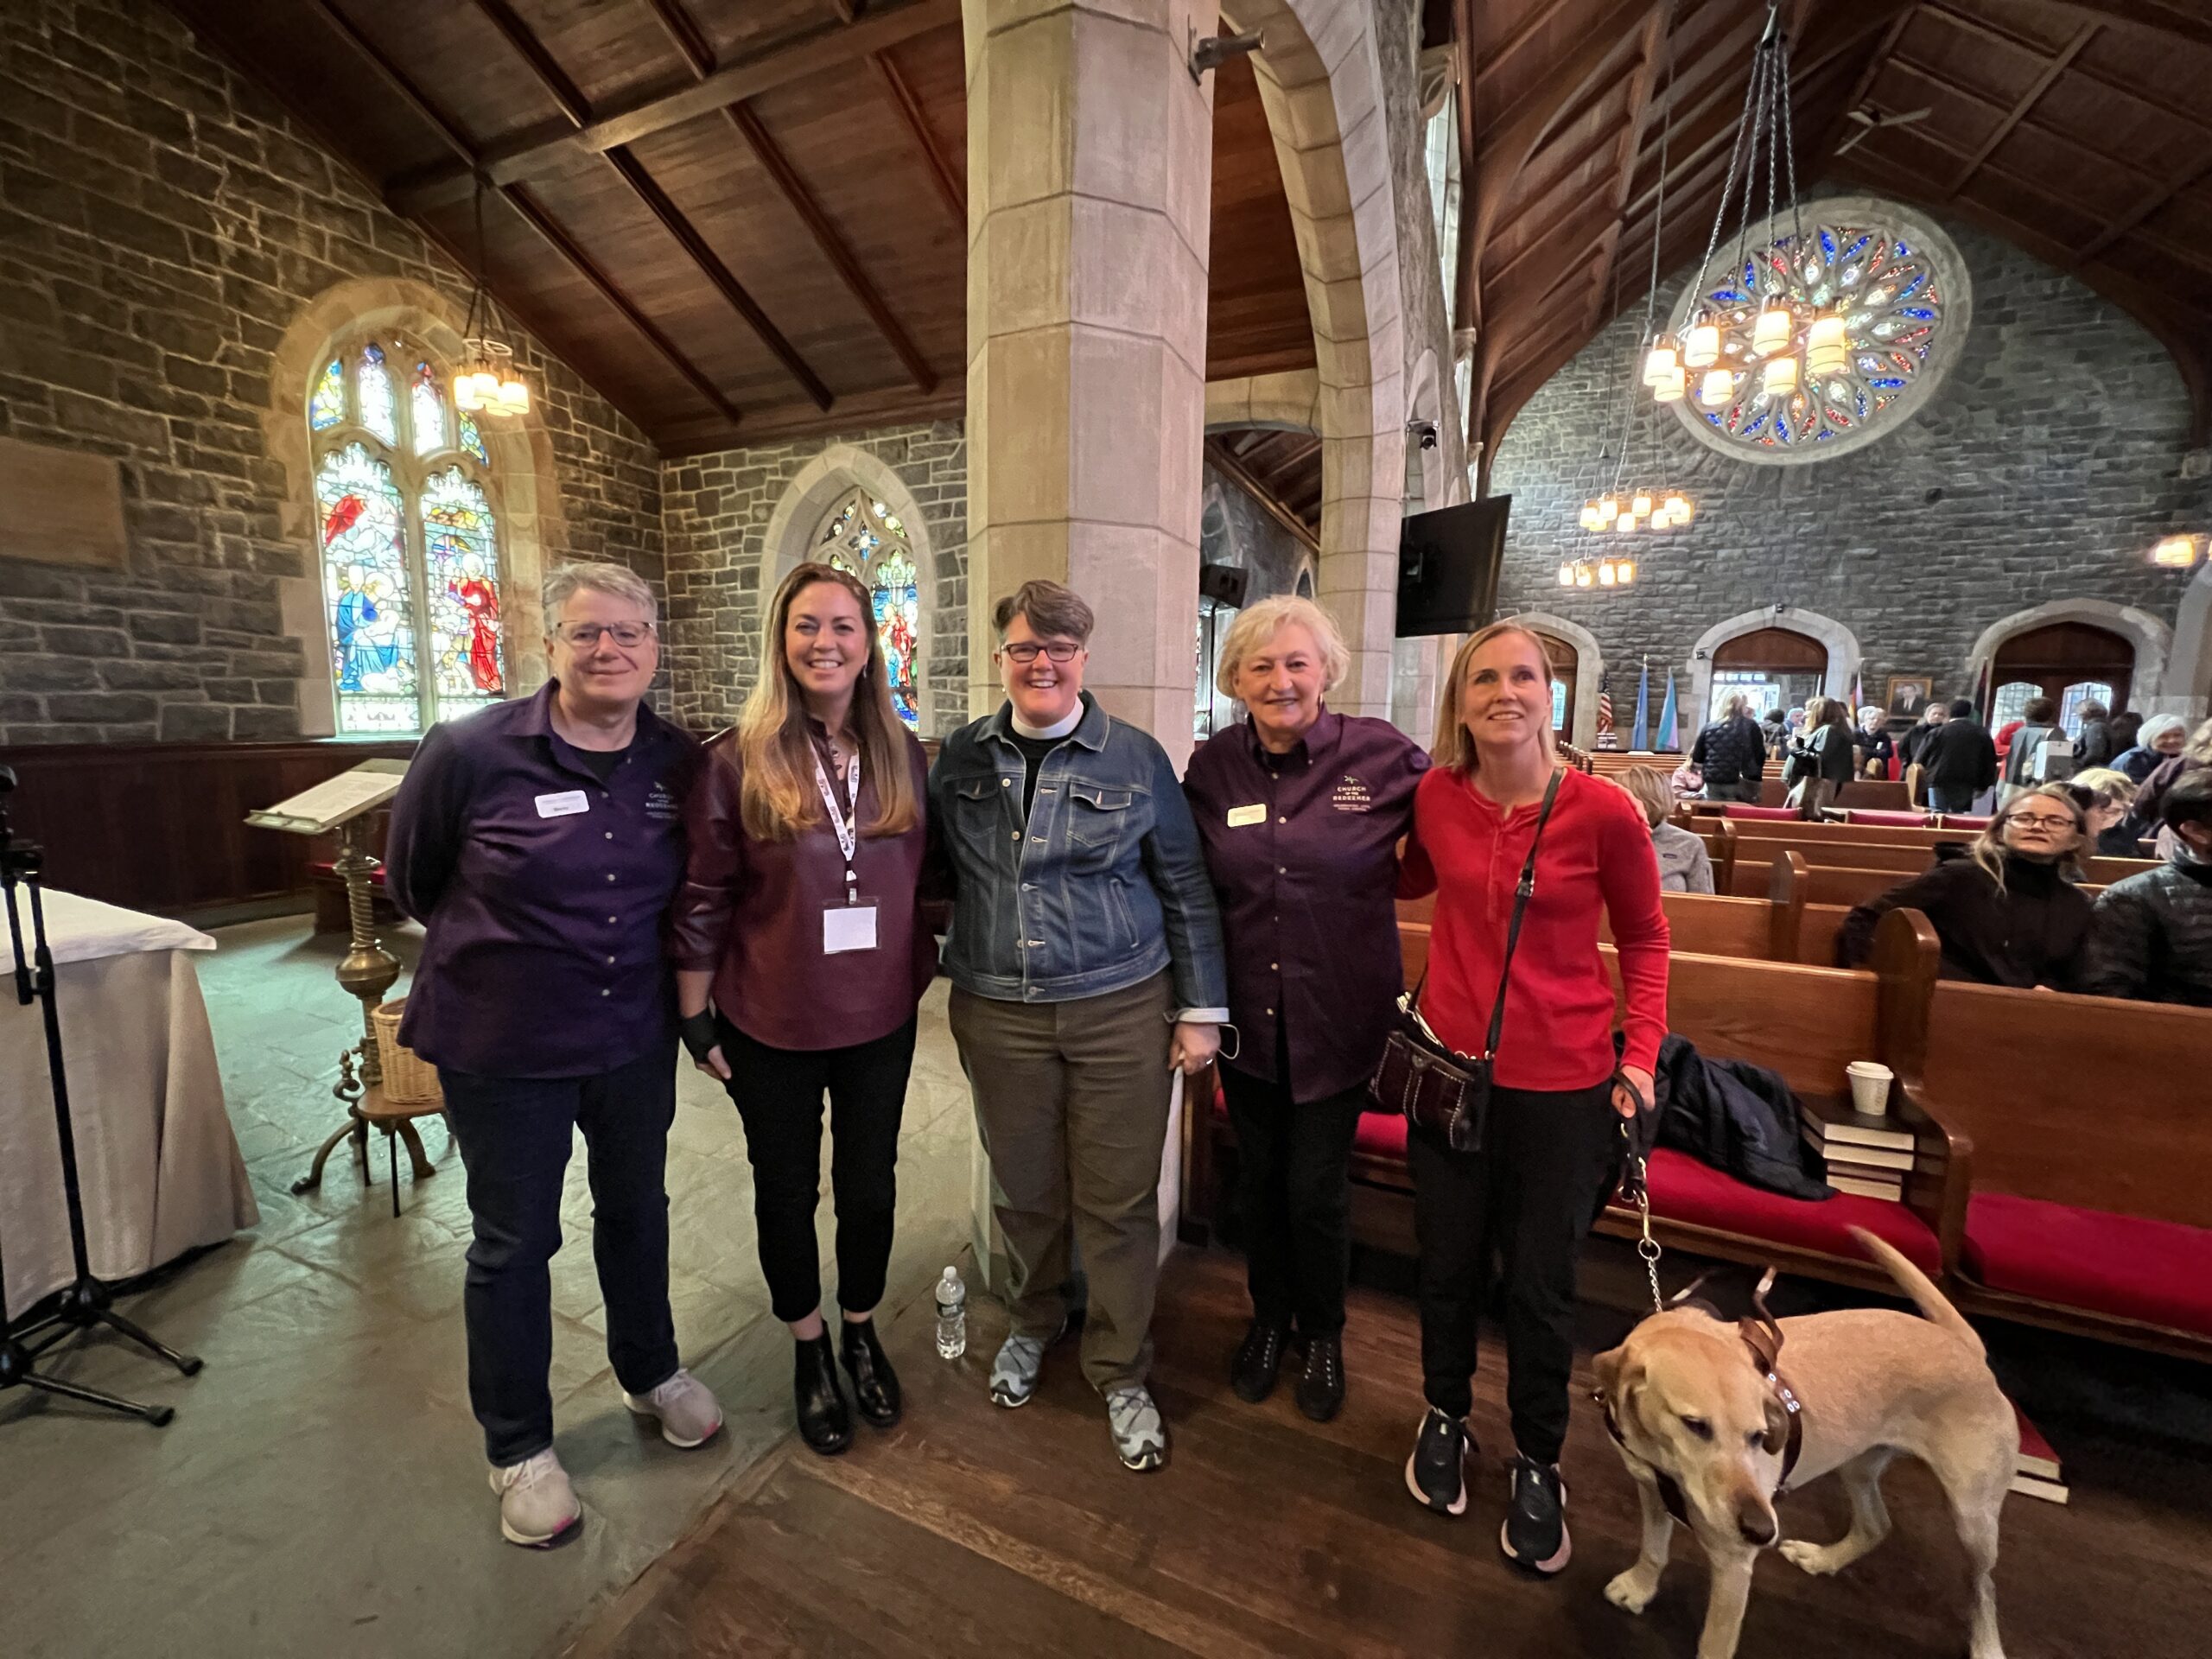 Book Group members in the Sanctuary